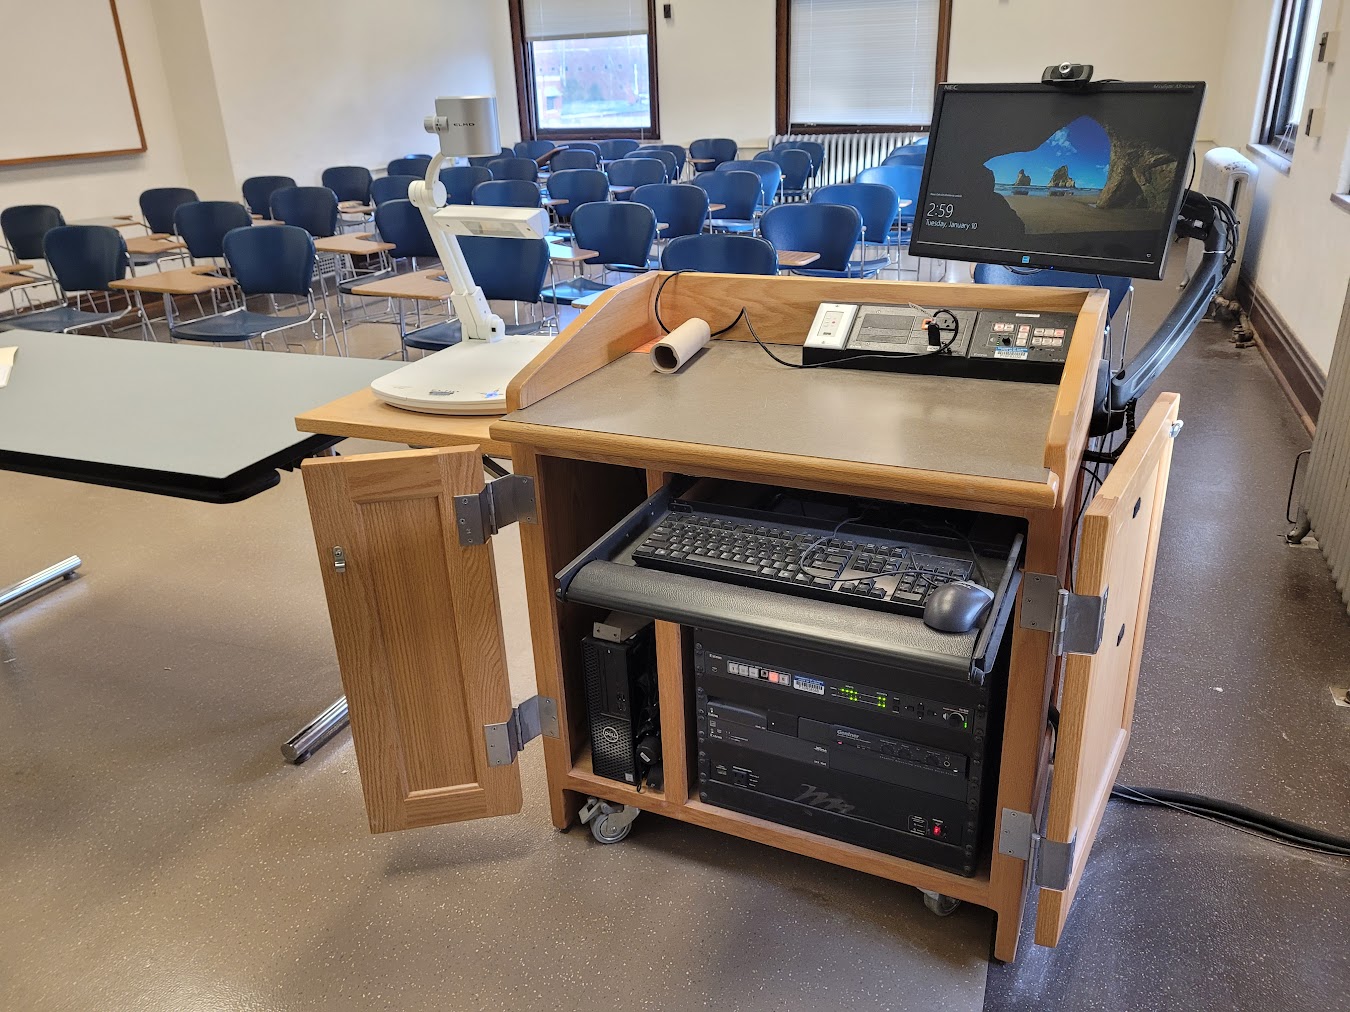 A view of the open cabinet with a computer monitor, HDMI inputs, a push button controller, document camera and audio visual rack.